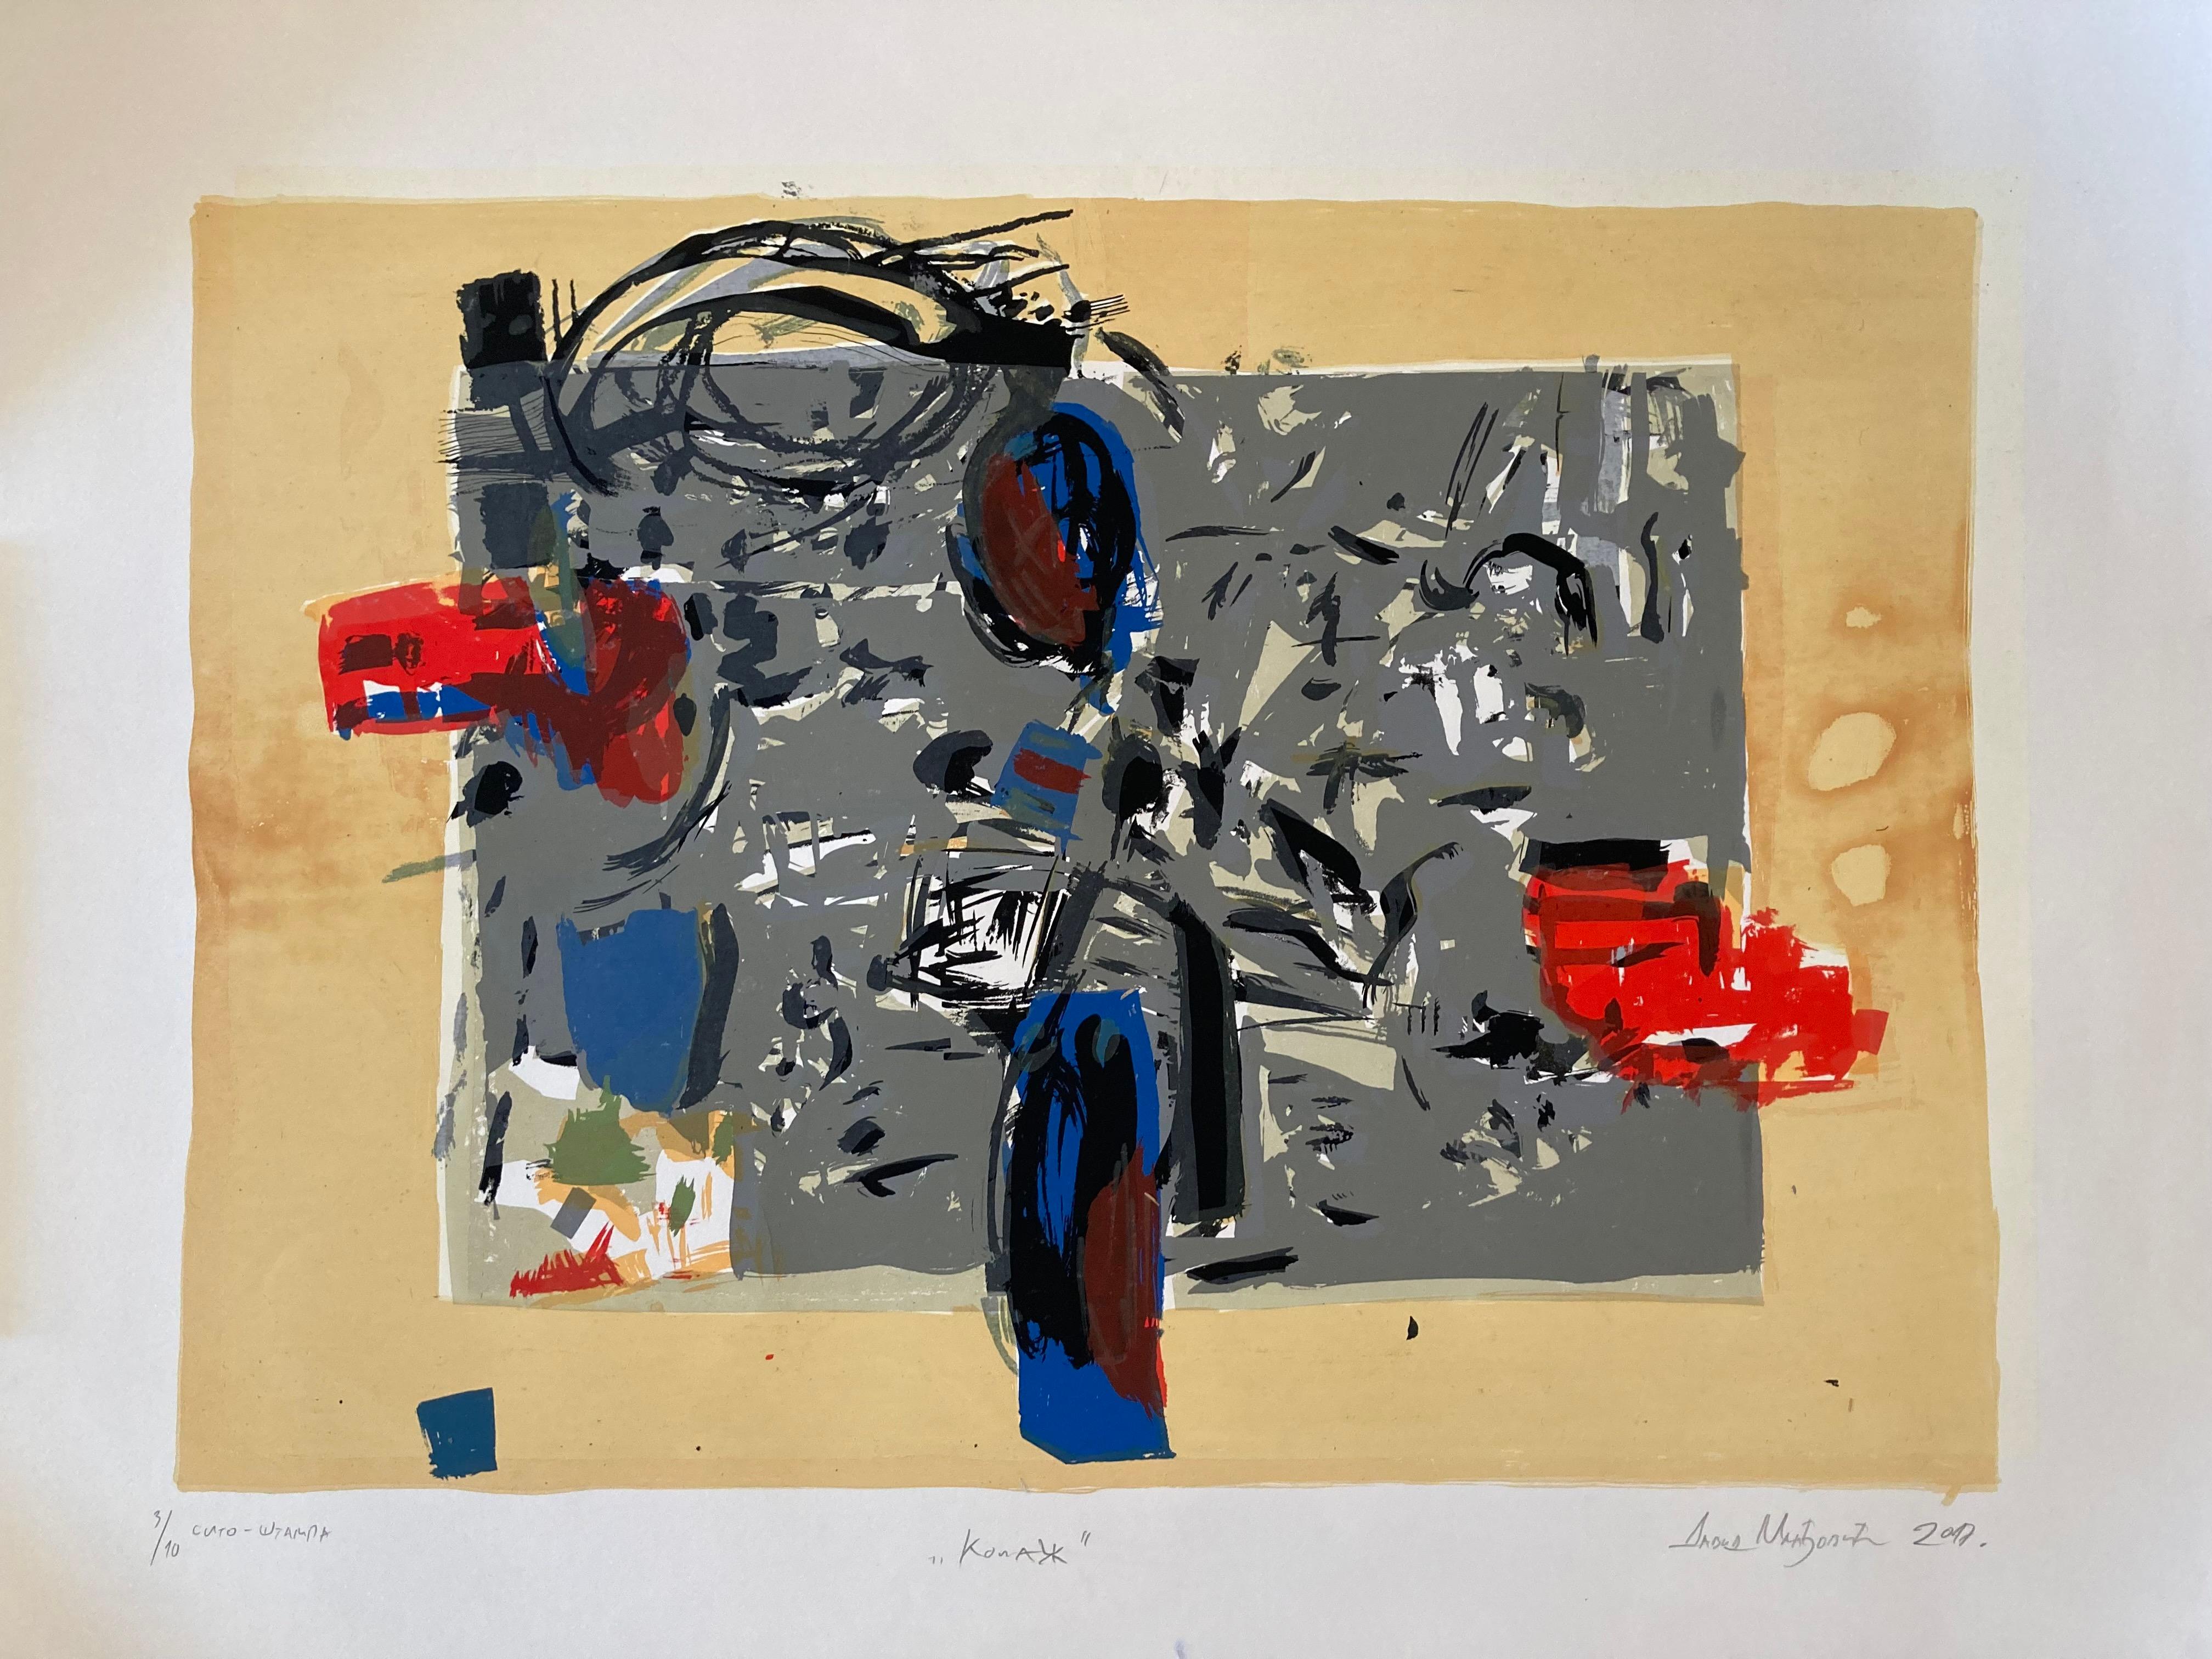 This 27.5" x 30.5" screen print (#3 of 10) by Serbian artist David Mladjovic depicts an abstract composition of dynamic forms with a palette of gray and pale yellow with vibrant shots of red, blue, and black.  

"To compose, or to put one next to